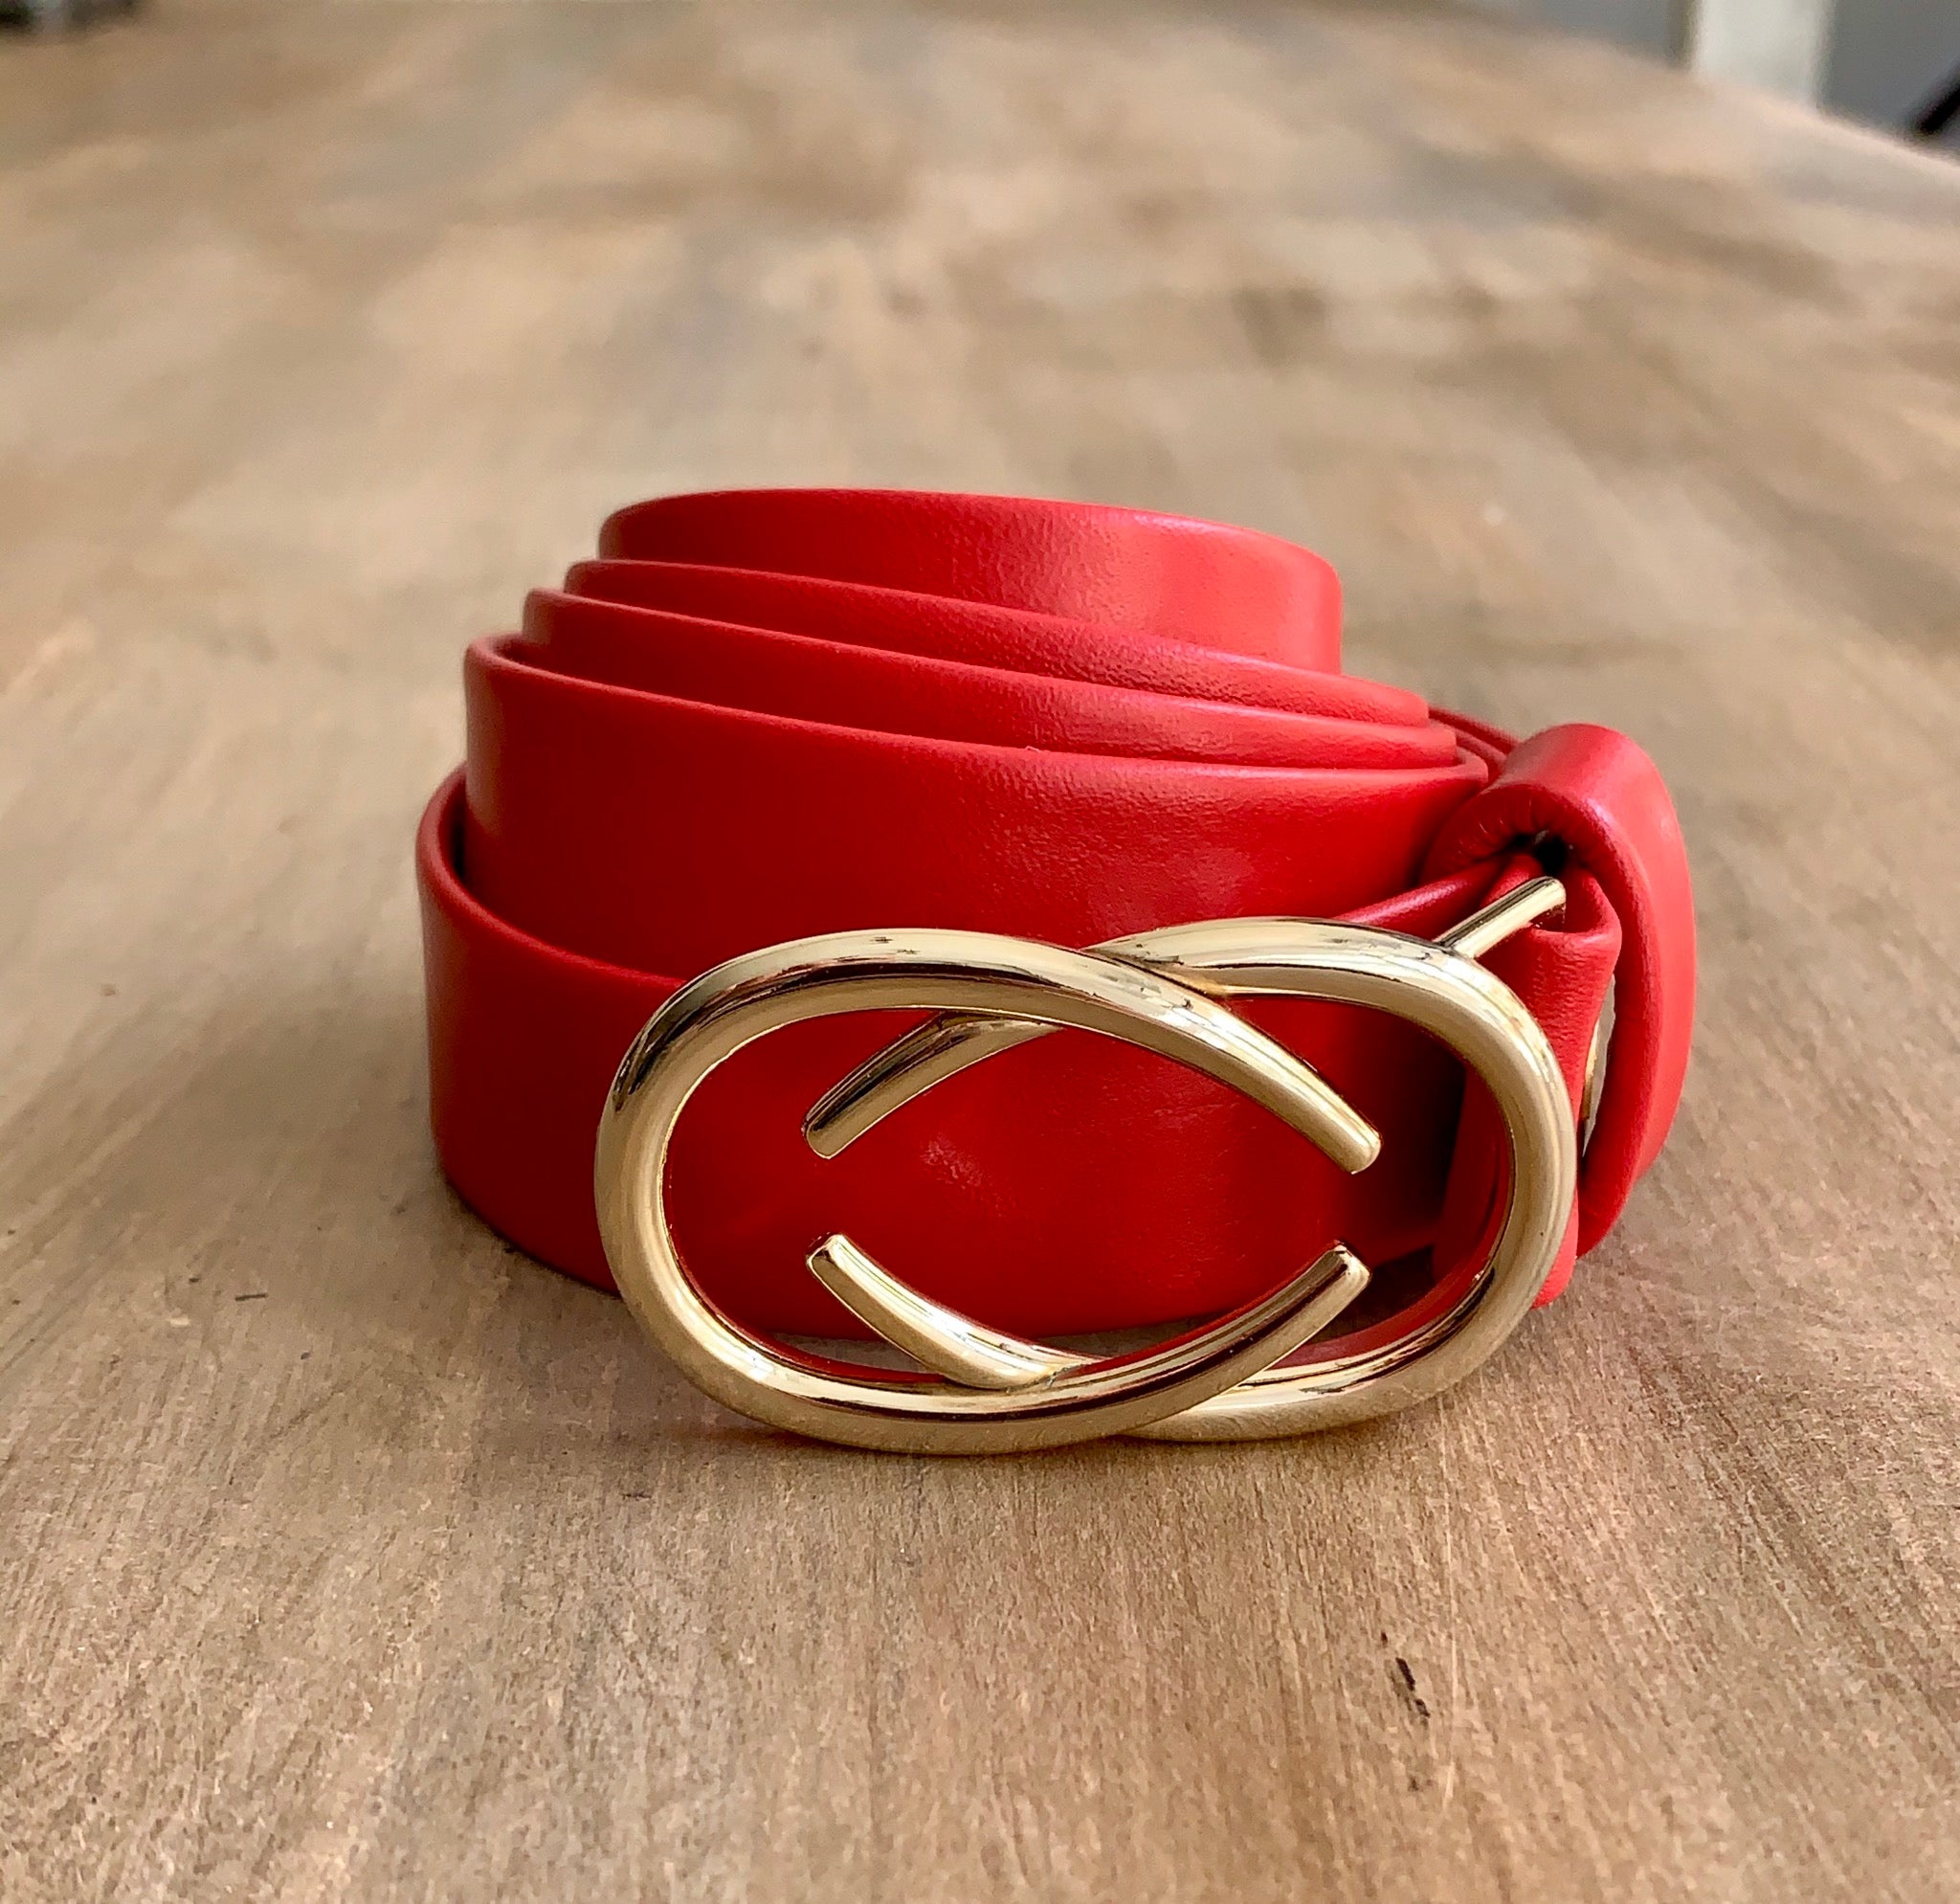 Women's thin belt handcrafted from red soft leather ideal for dresses WB101293/25